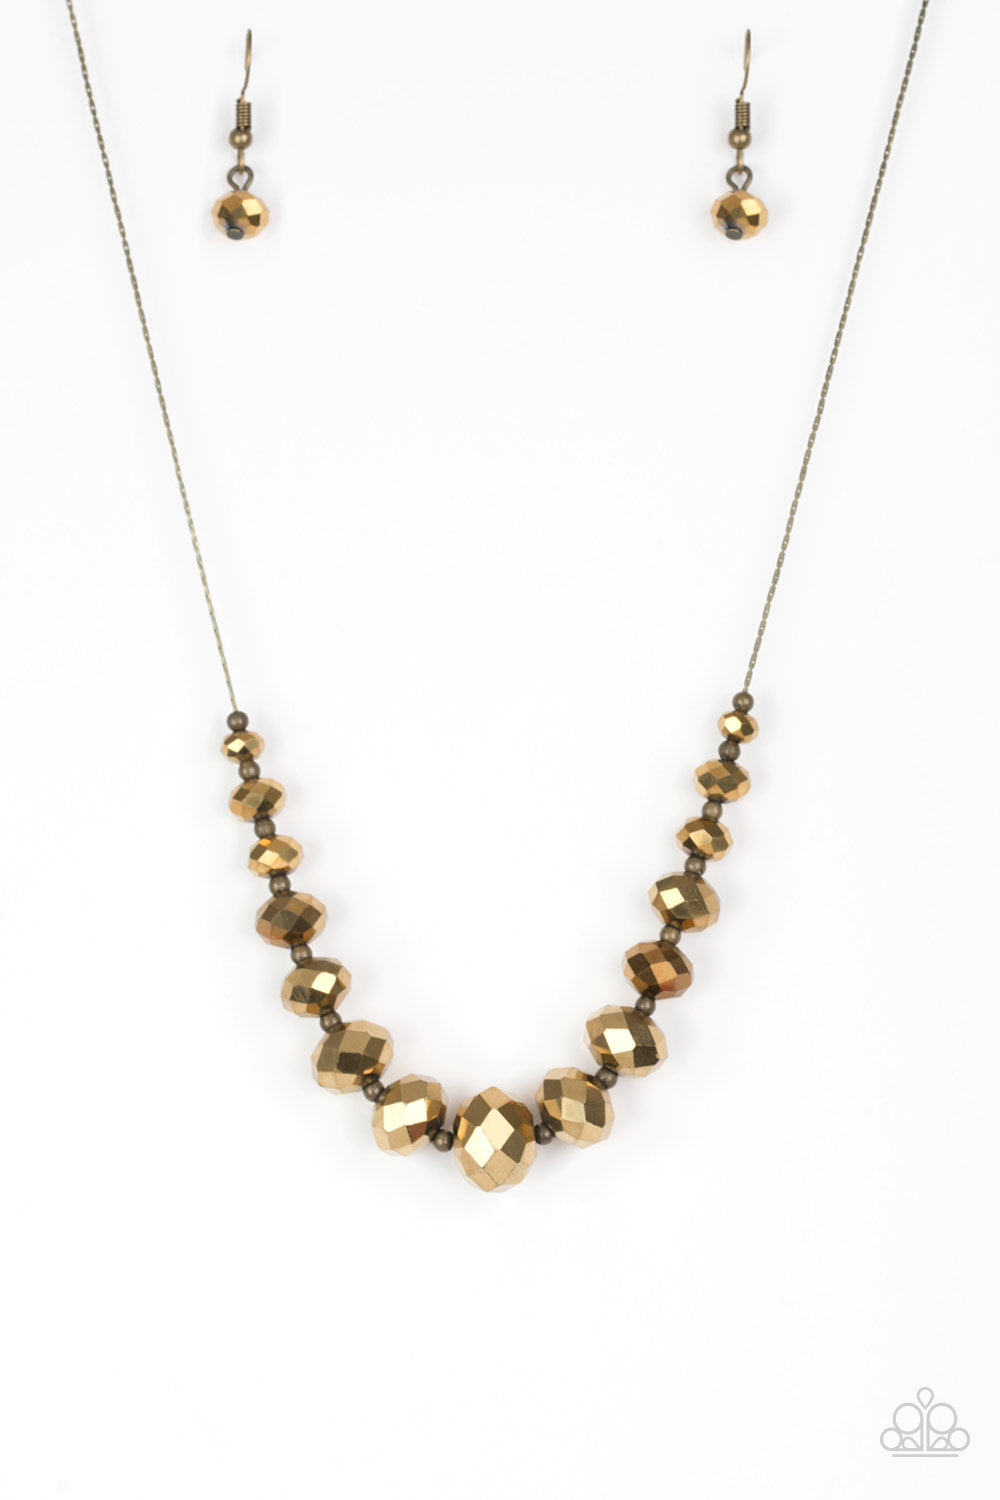 Paparazzi ♥ Crystal ♥ Brass LisaAbercrombie - Necklace Carriages –